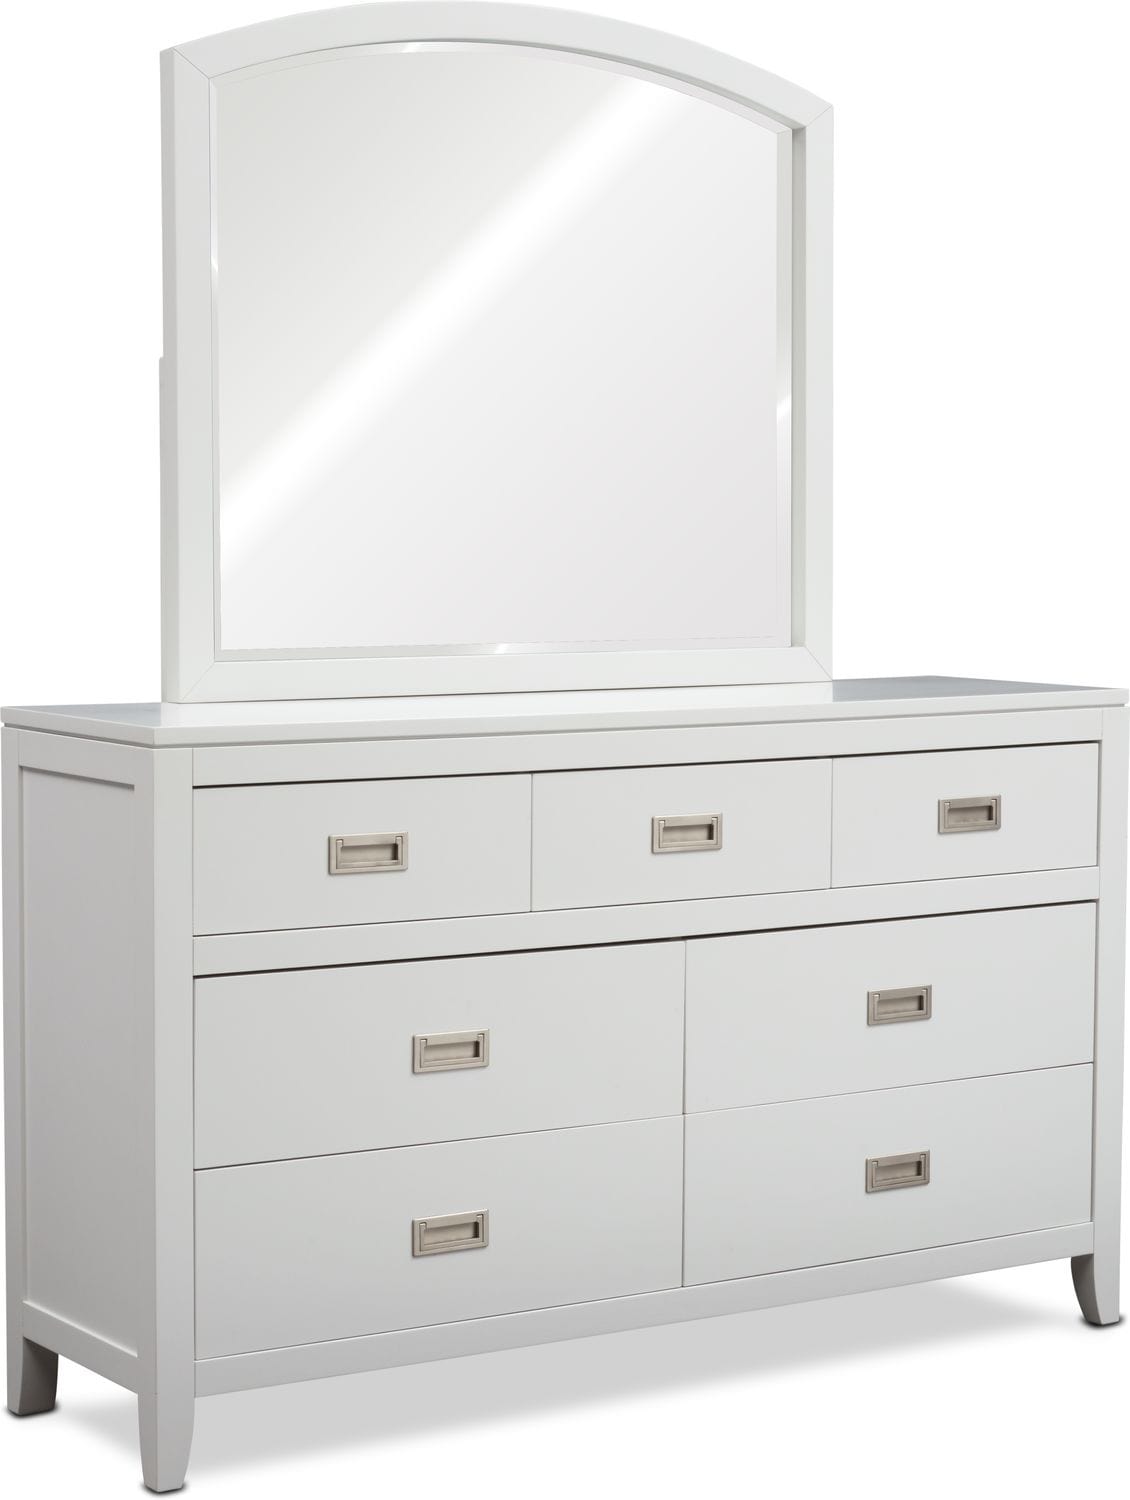 Emerson Dresser And Mirror Value City Furniture And Mattresses